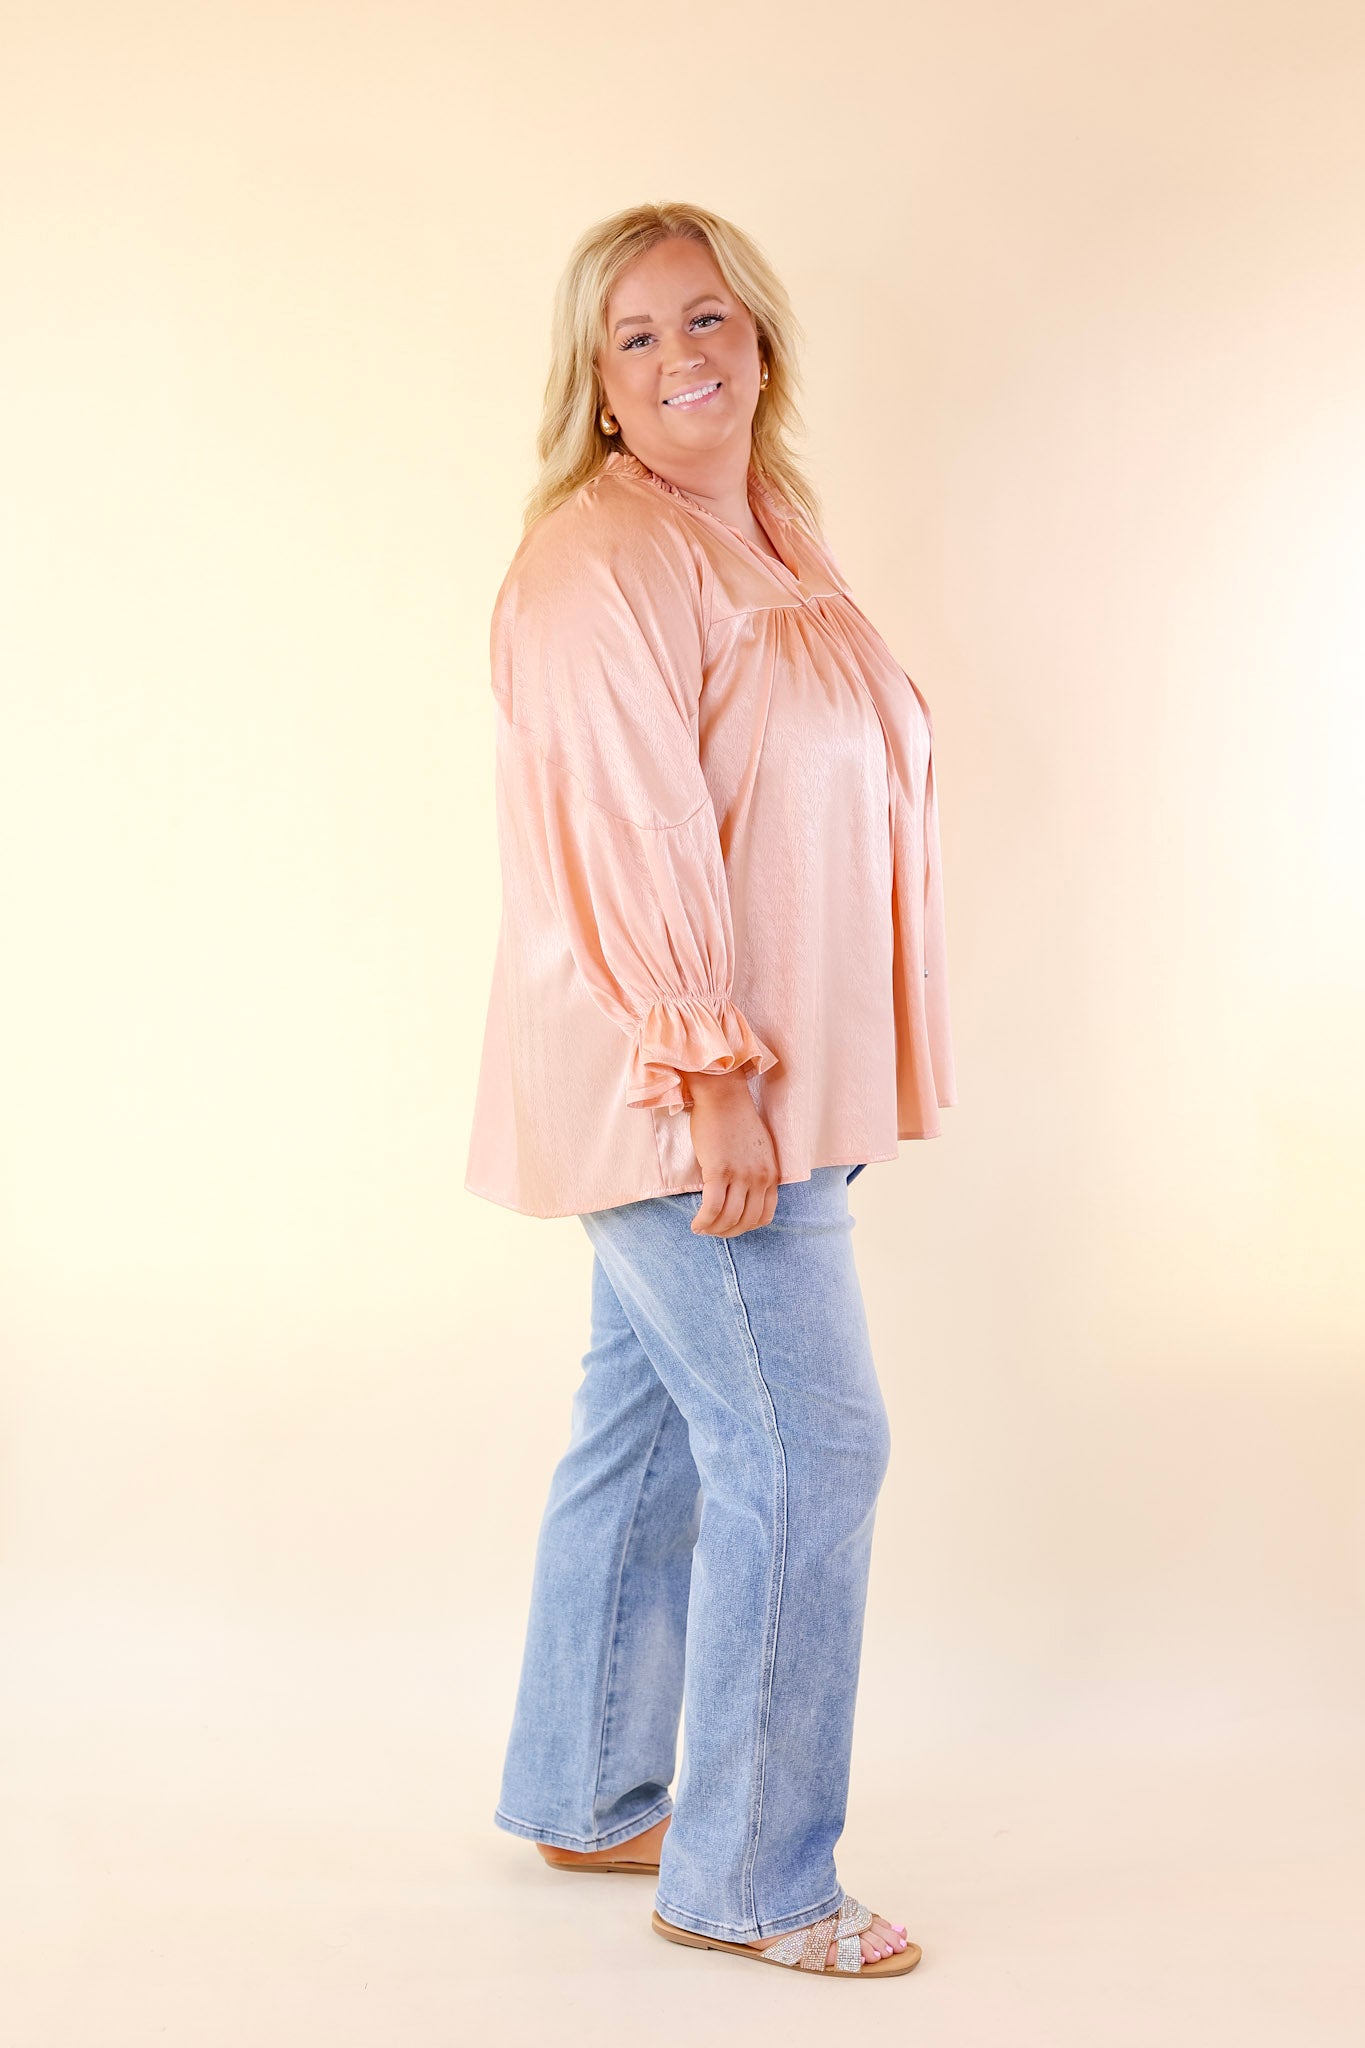 Judy Blue | Essential Ease Tummy Control Straight Leg Jeans in Medium Wash - Giddy Up Glamour Boutique